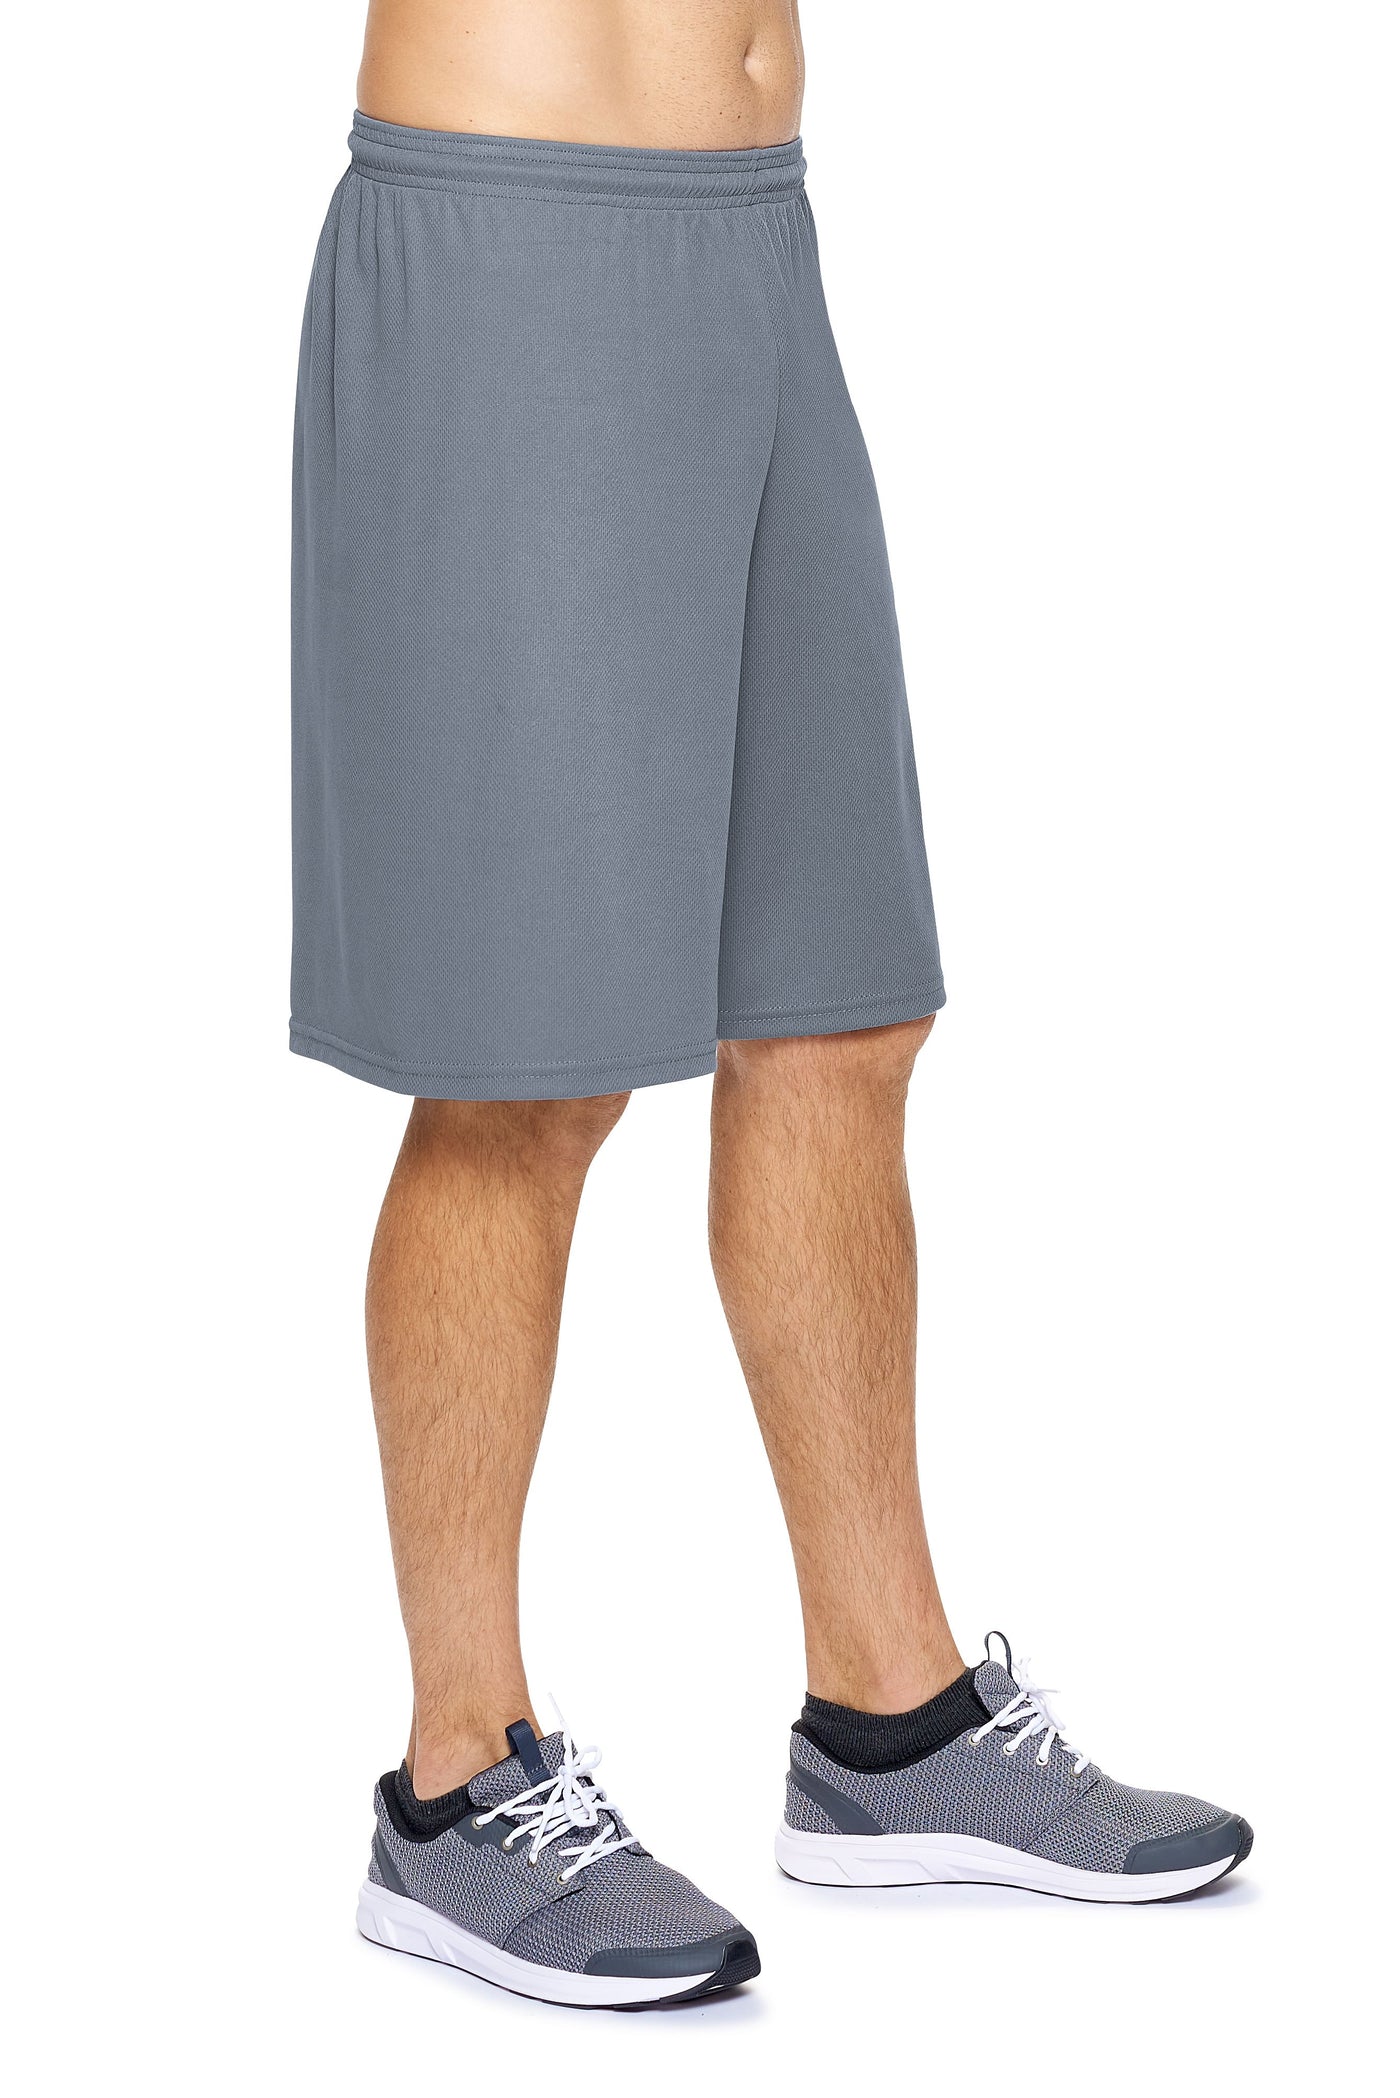 Expert Apparel Men's Oxymesh™ Training Shorts in Graphite#color_graphite